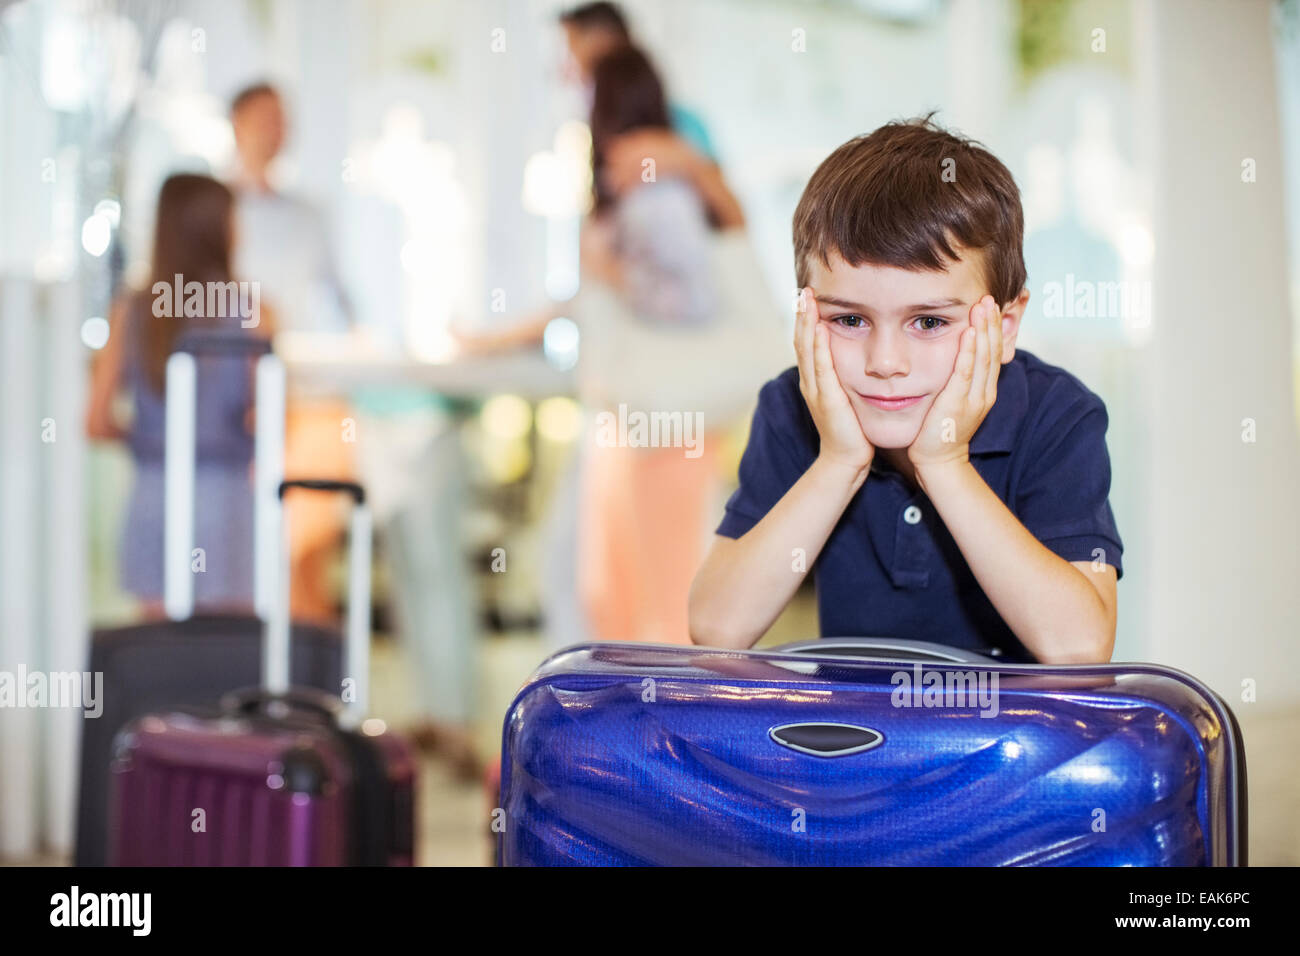 Portrait of pensive boy leaning on suitcase in hotel lobby Banque D'Images